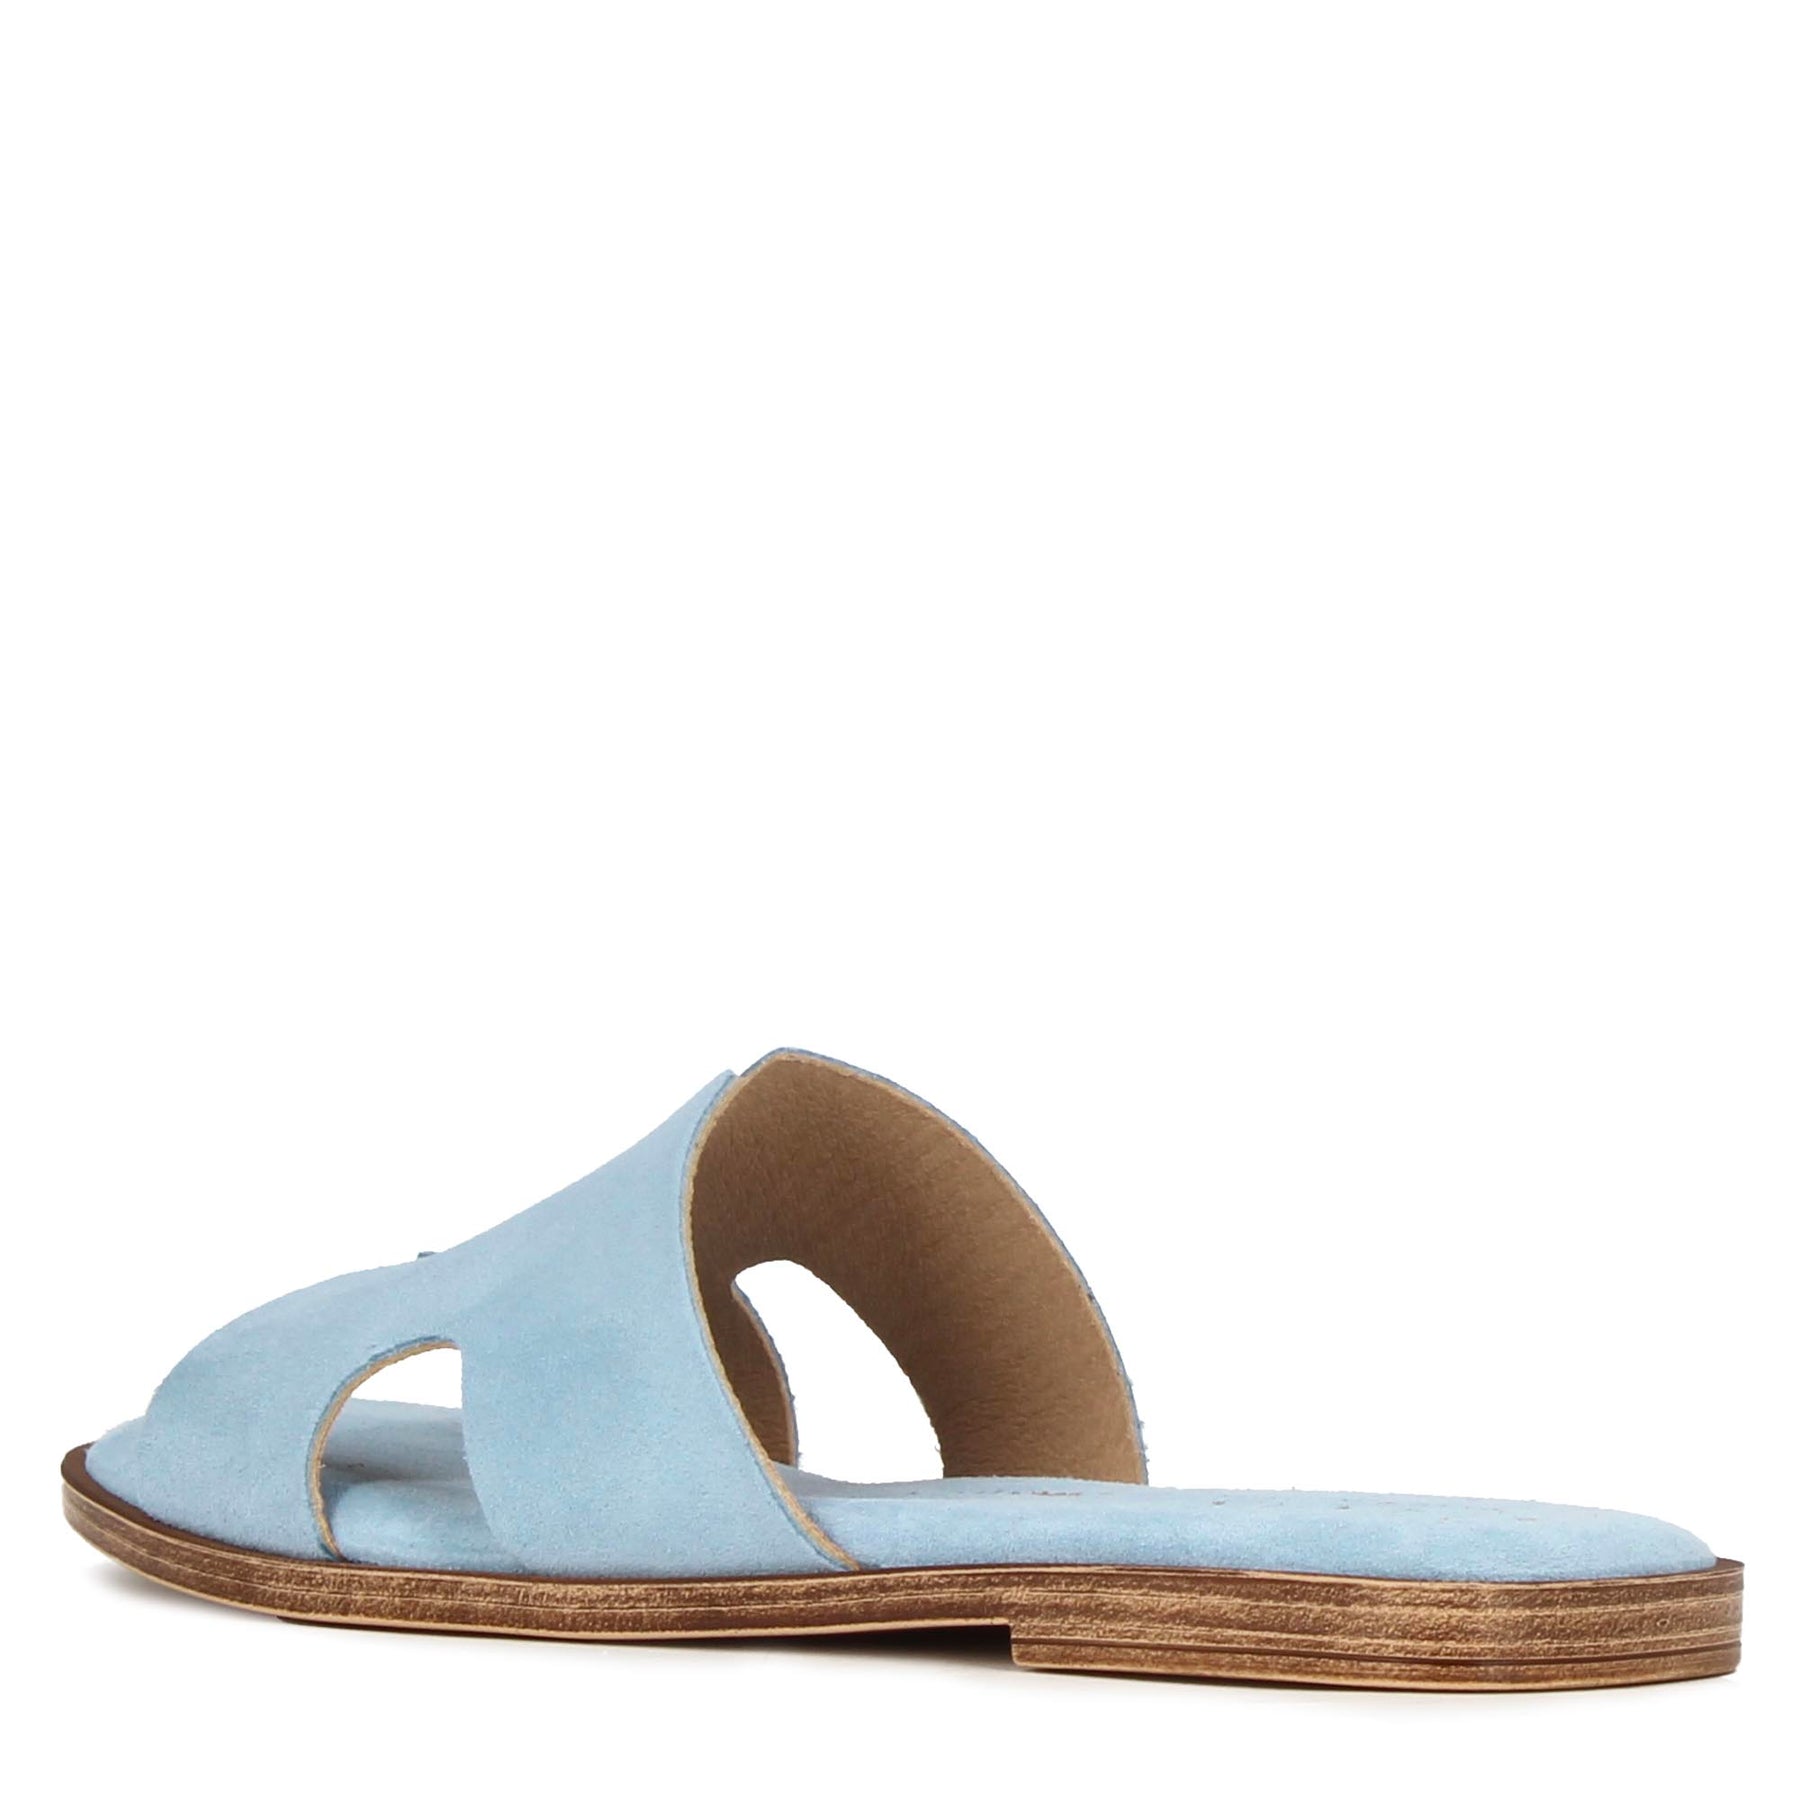 Women's slippers in turquoise suede leather